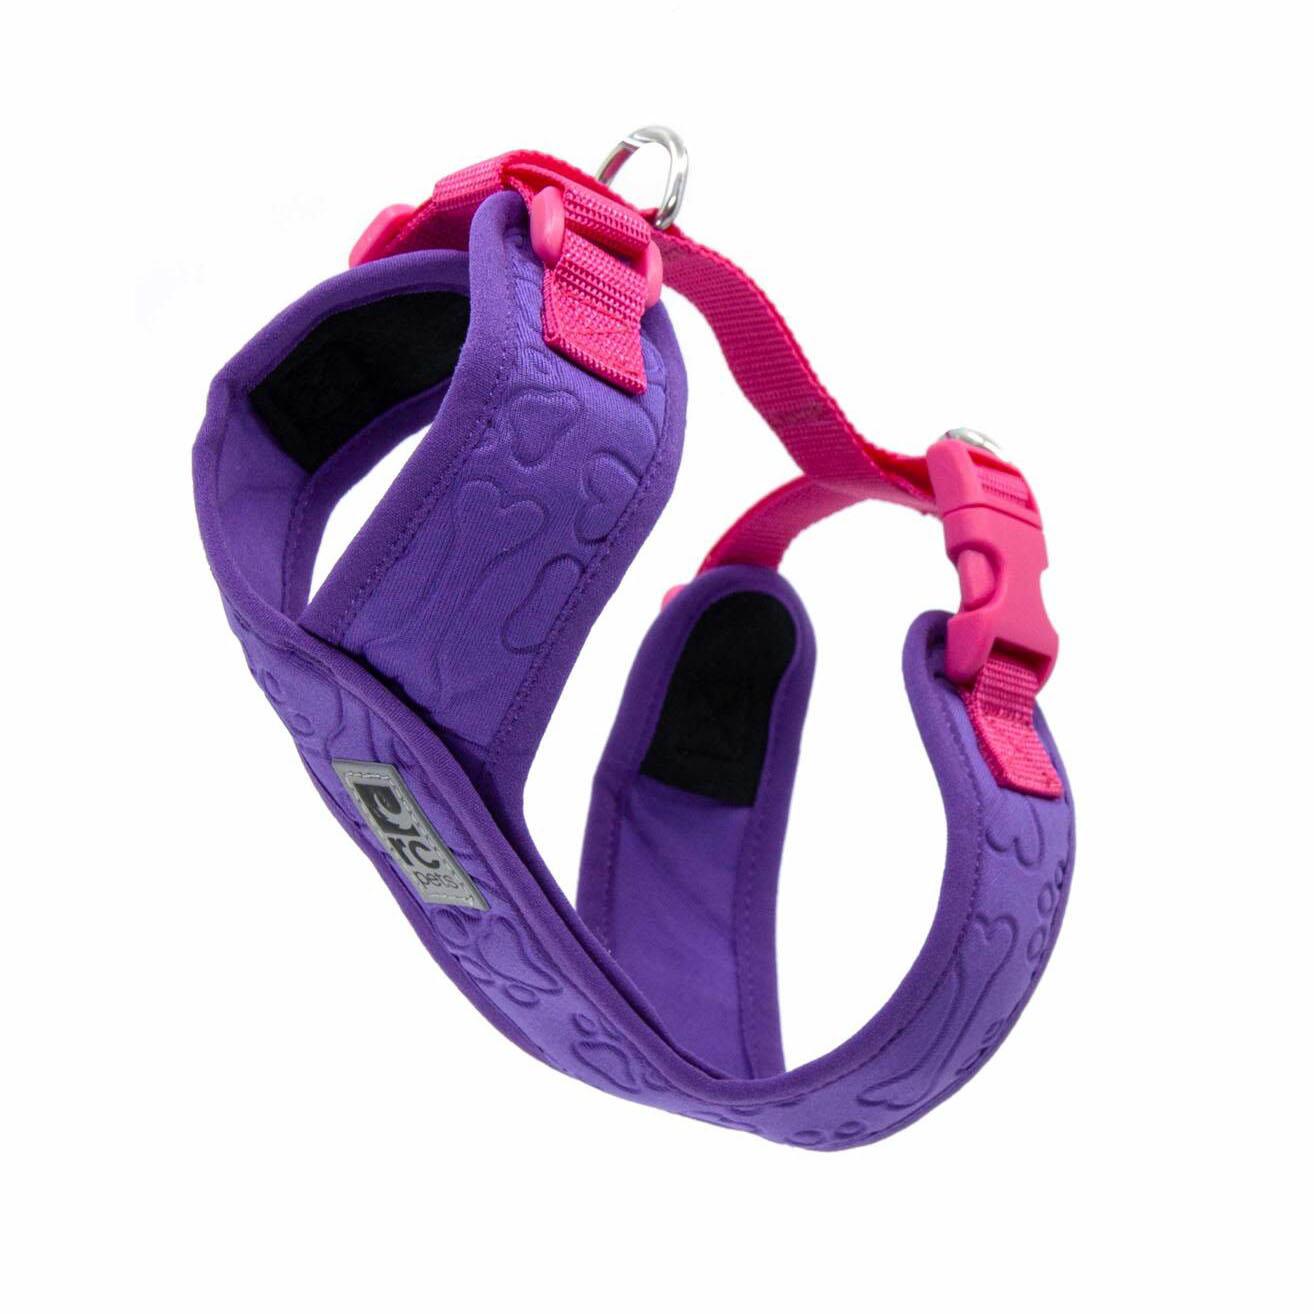 Swift Comfort Dog Harness by RC Pets - Purple / Pink